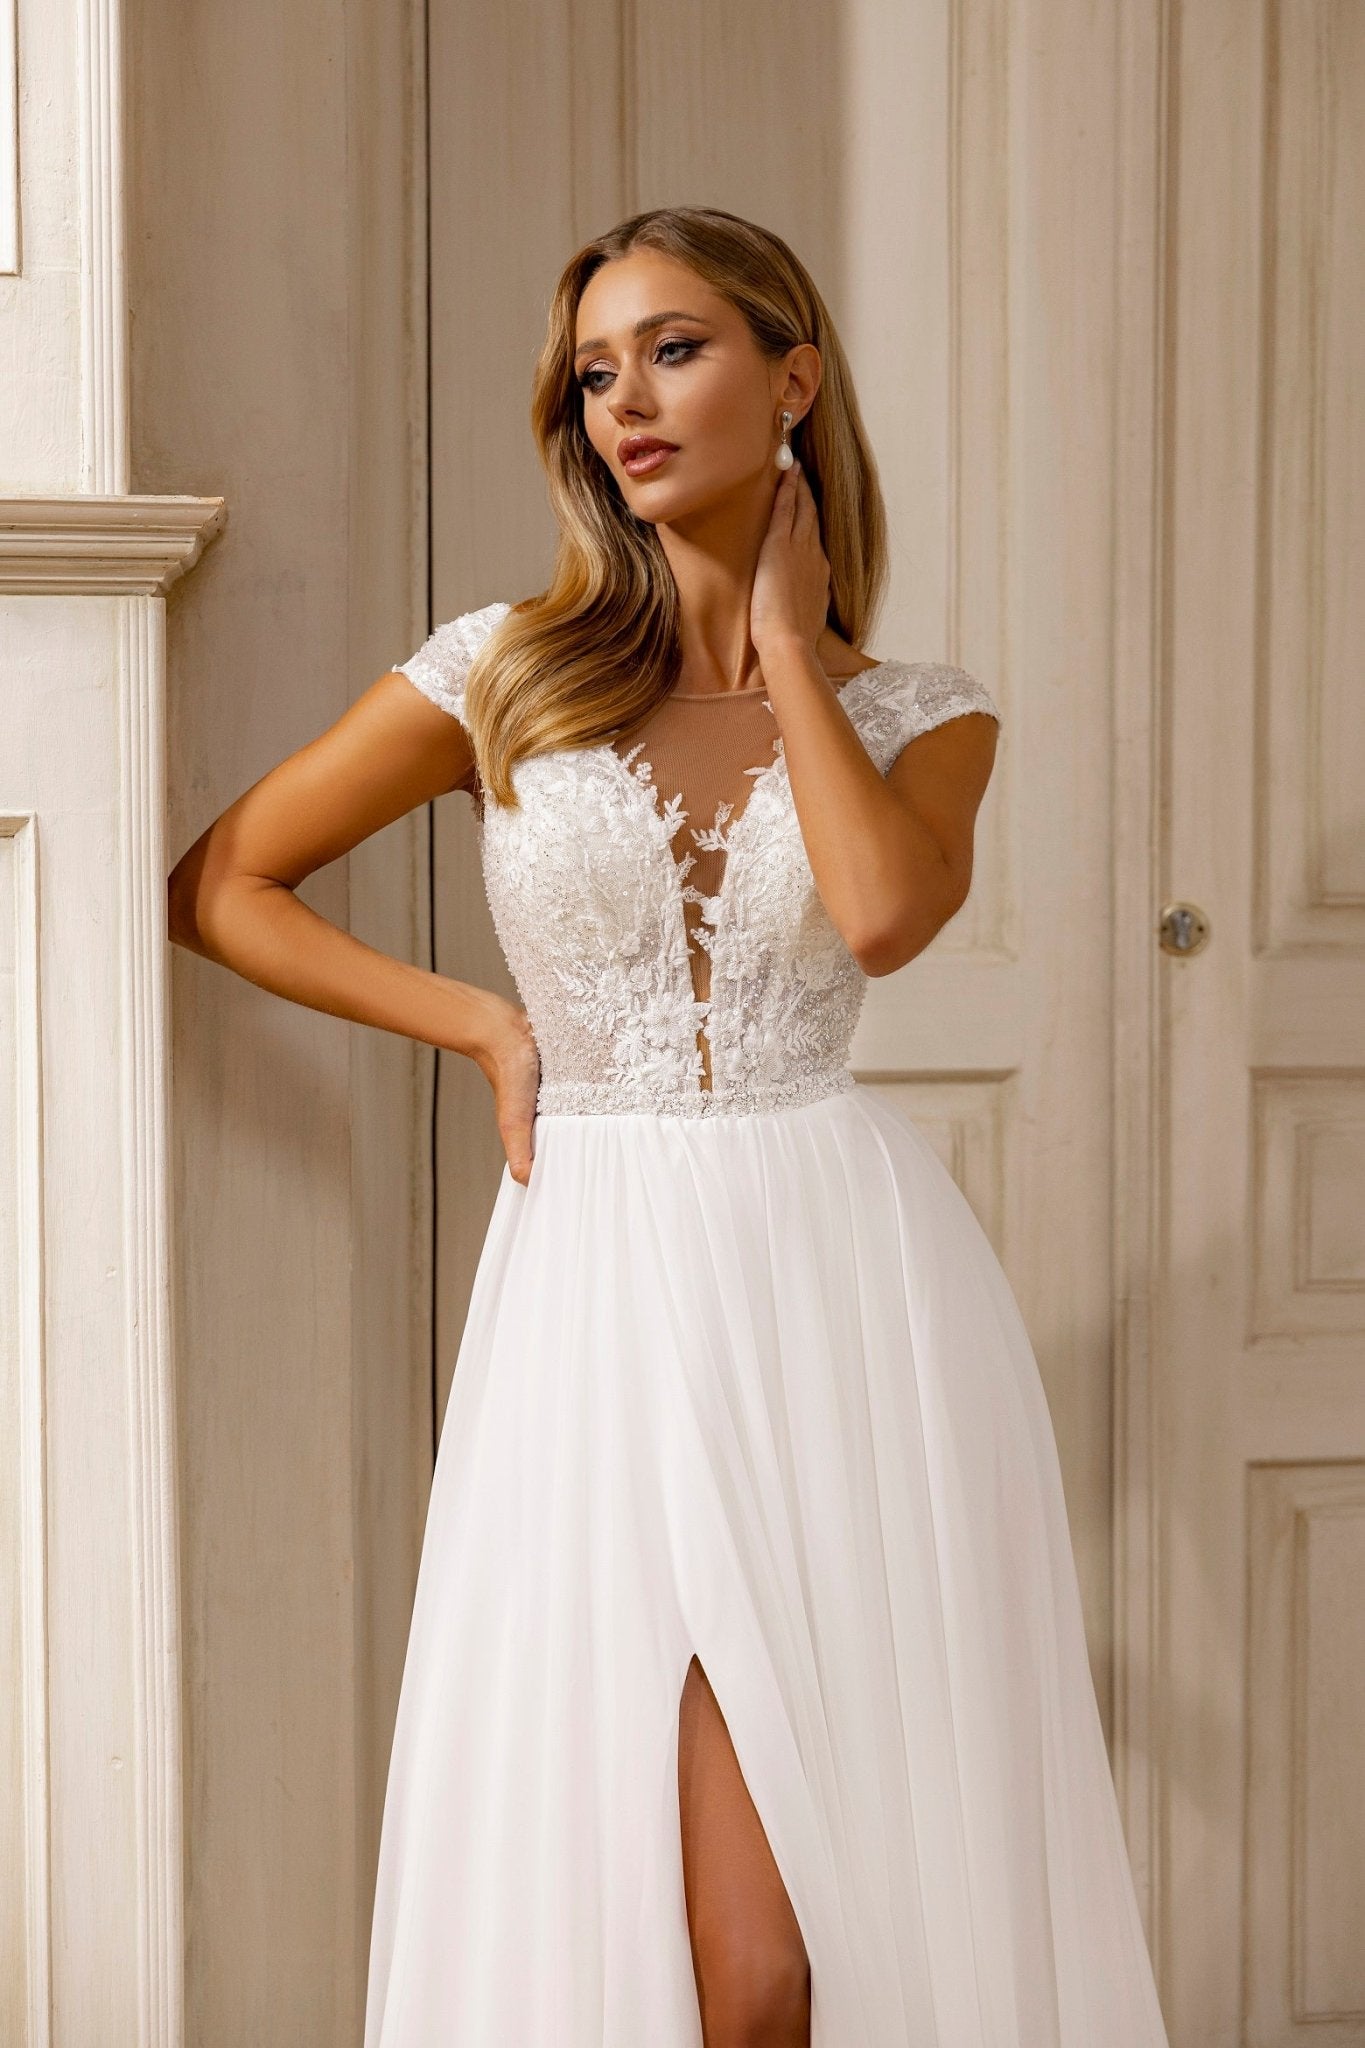 Sophisticated A-Line Wedding Dress with Lace Embellishments and Sheer Overlay Train - WonderlandByLilian